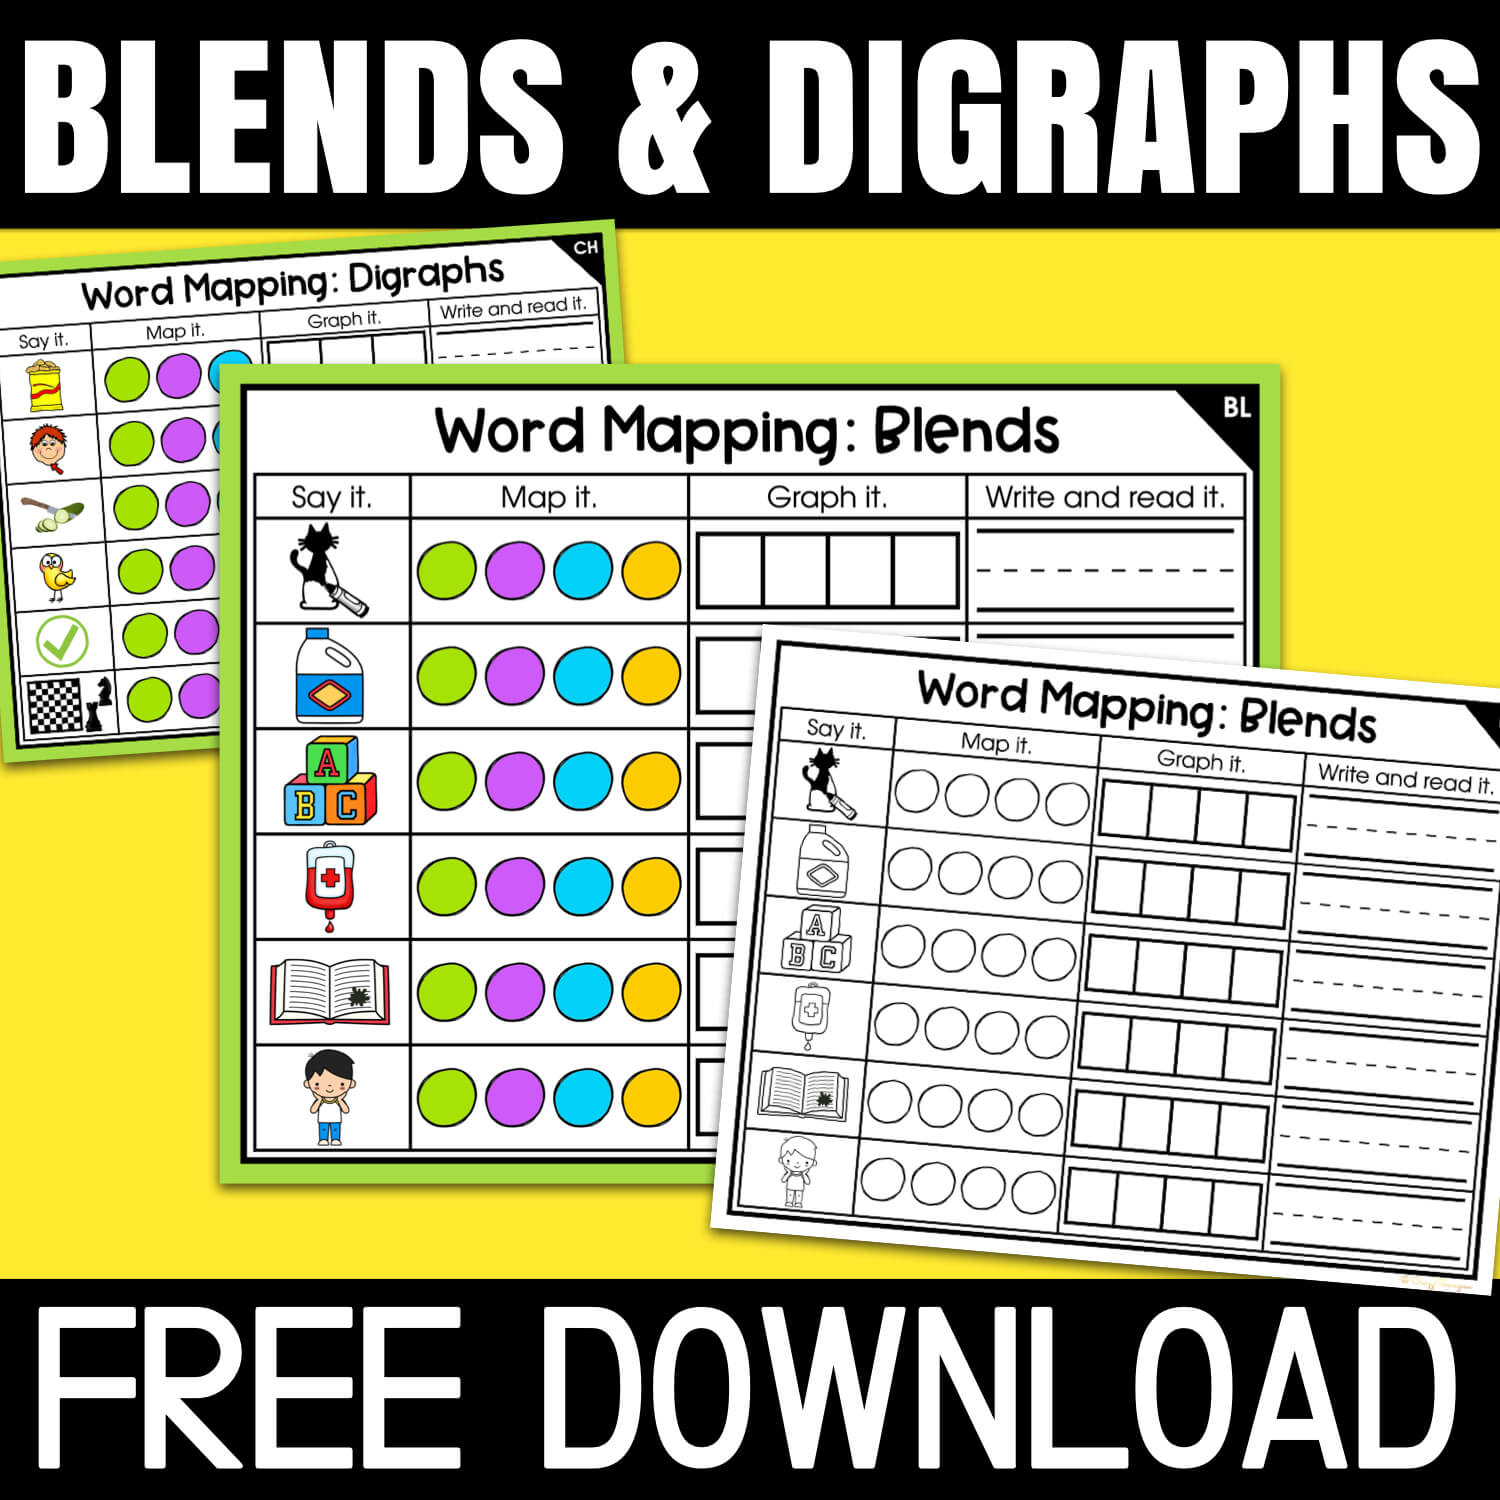 Word Mapping Mats